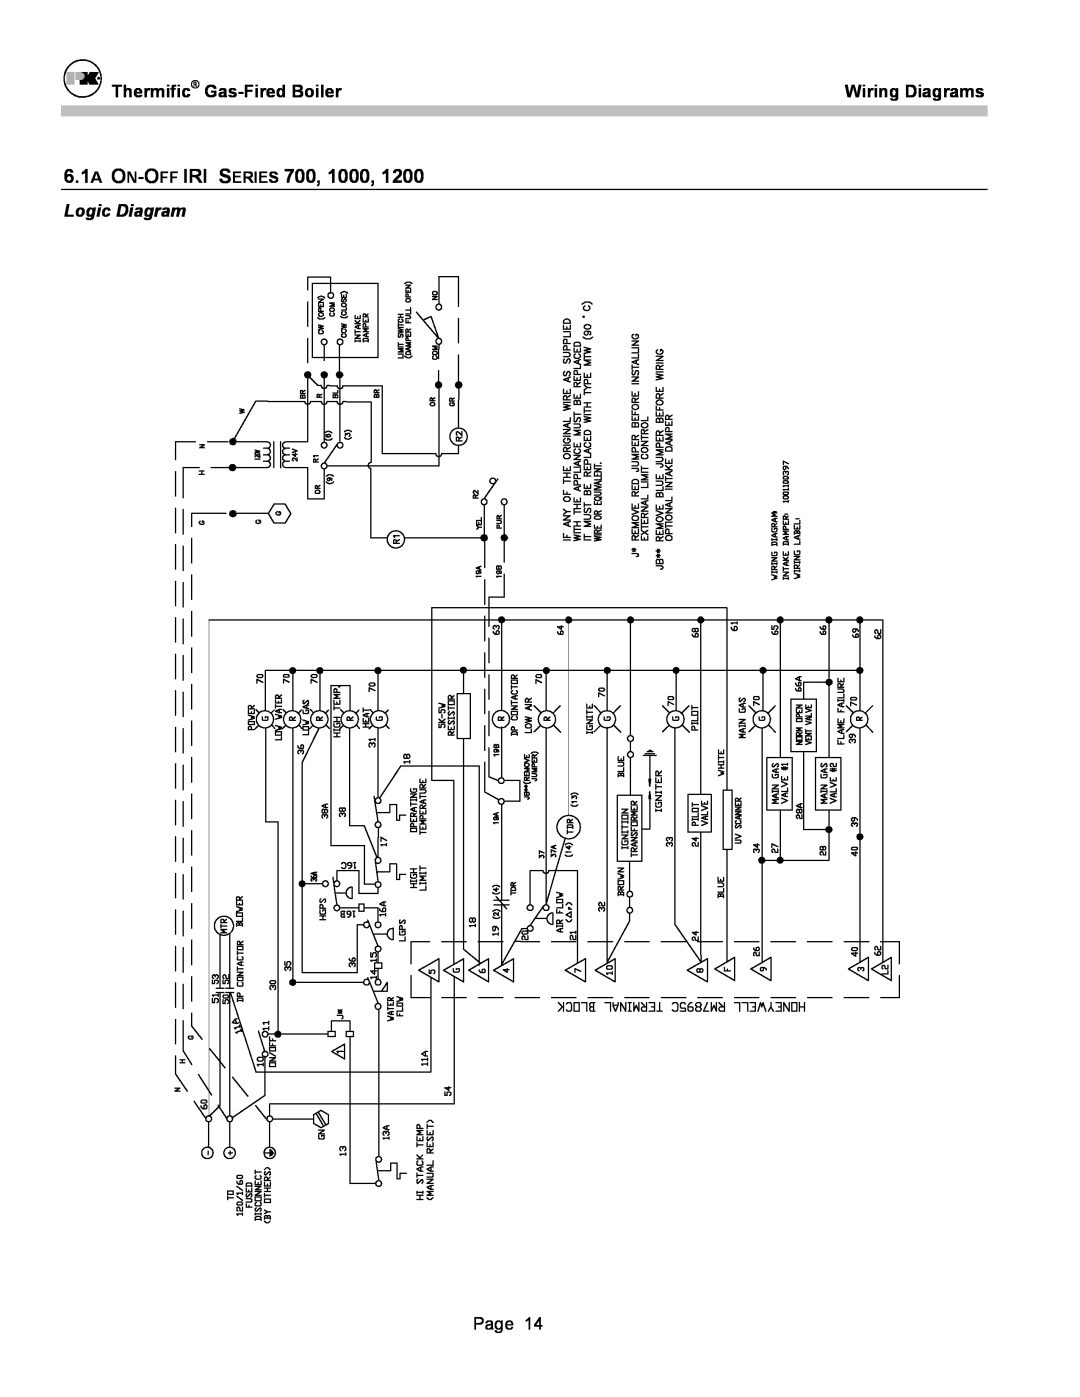 Patterson-Kelley DVSCM-02 owner manual 6.1A ON-OFF IRI SERIES, Thermific Gas-FiredBoiler, Wiring Diagrams, Logic Diagram 